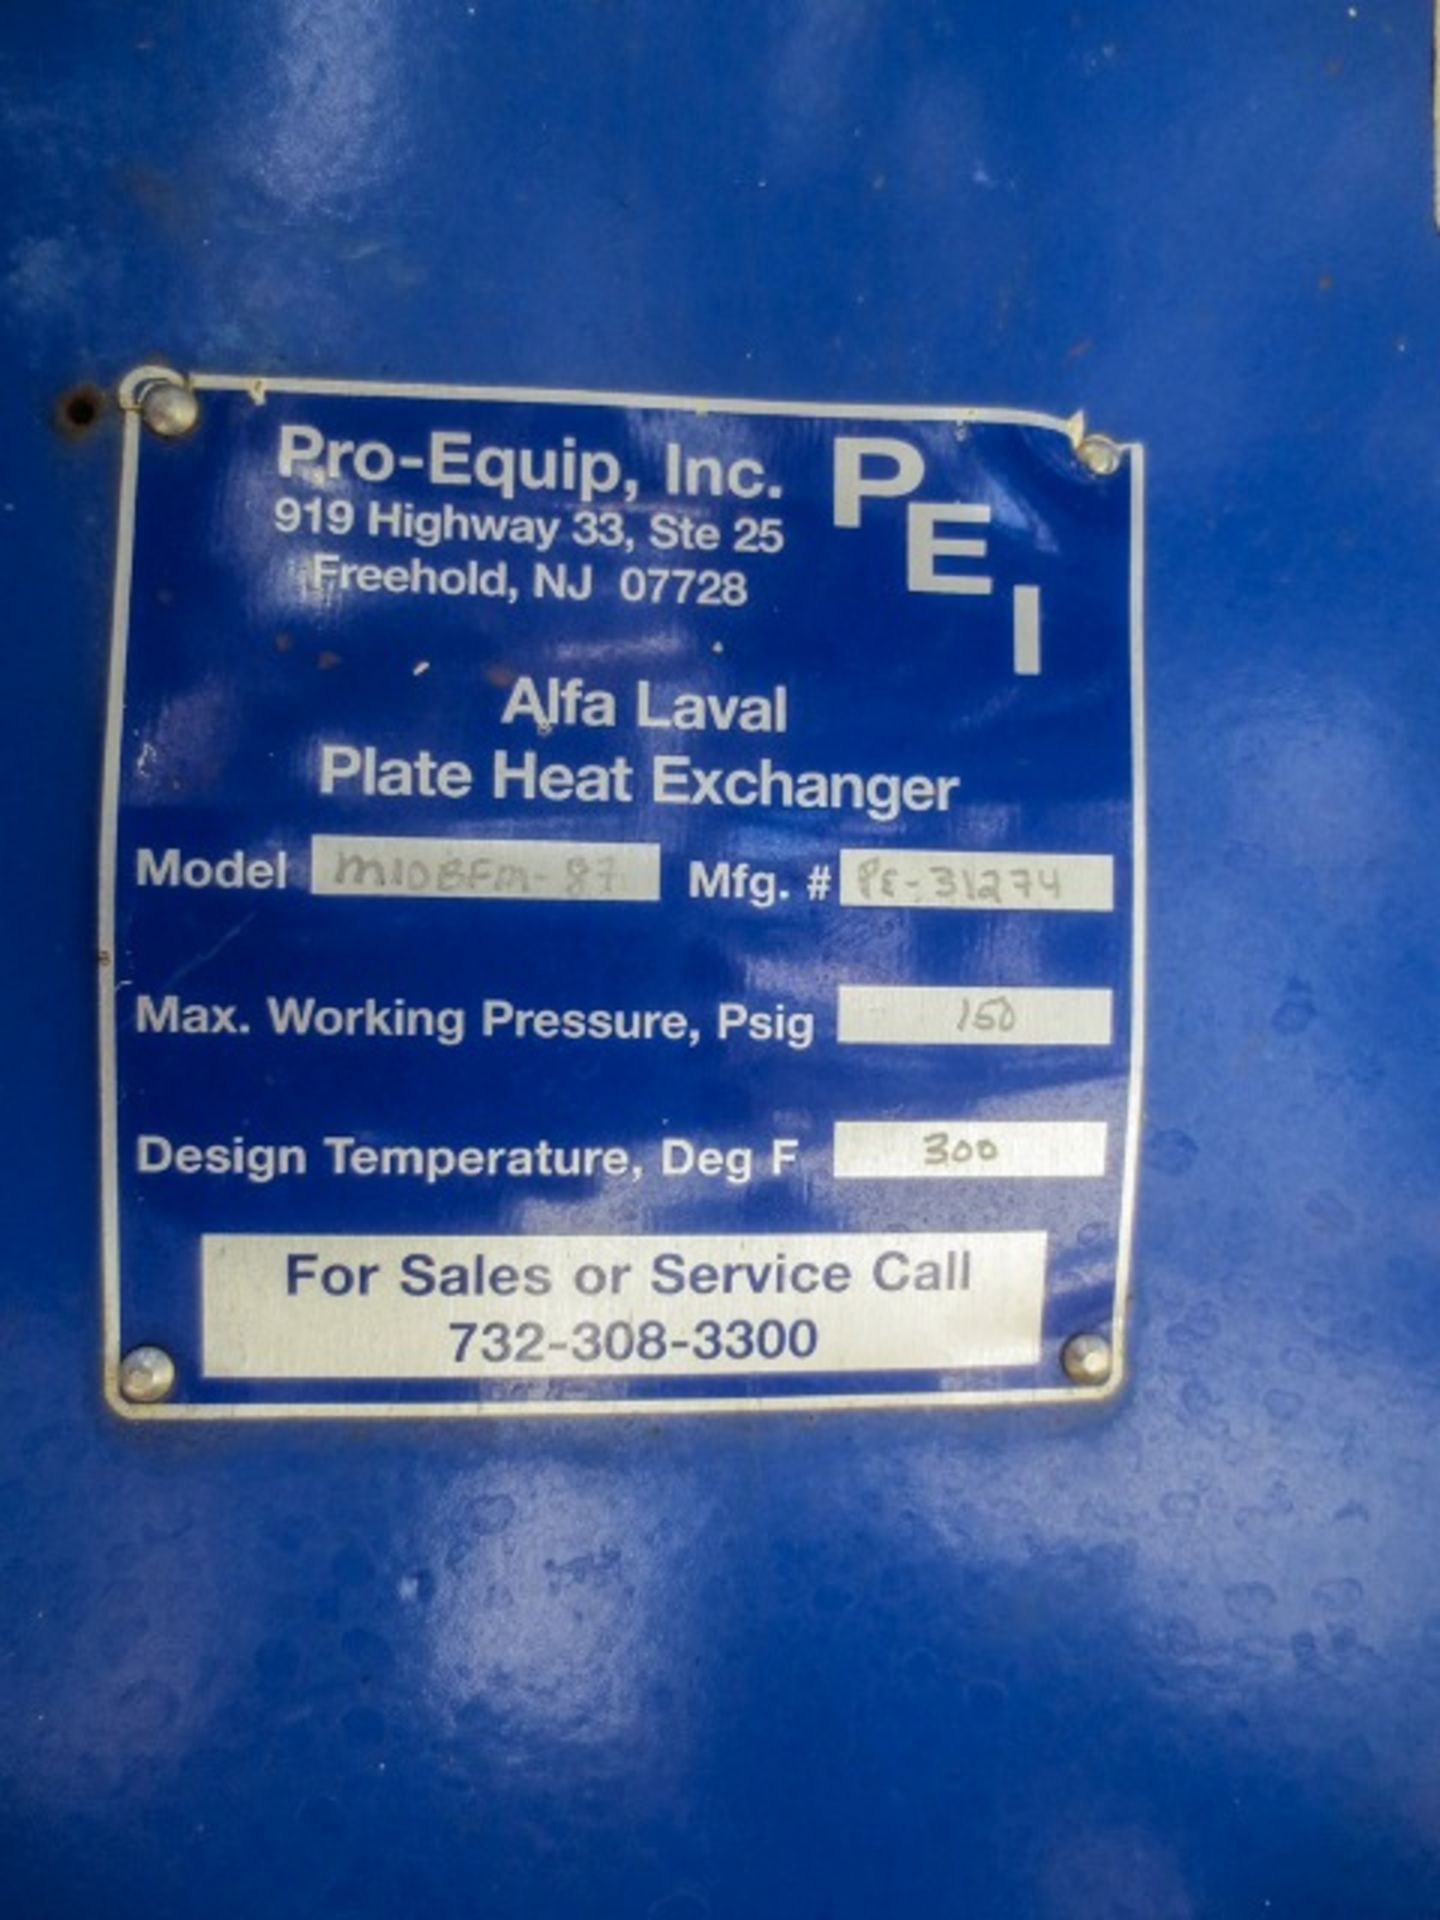 Alfa Laval plate heat exchanger Model MIDBFM-87. Ser # PE-31274. Rated at 150 psig at 300F. Used - Image 3 of 4